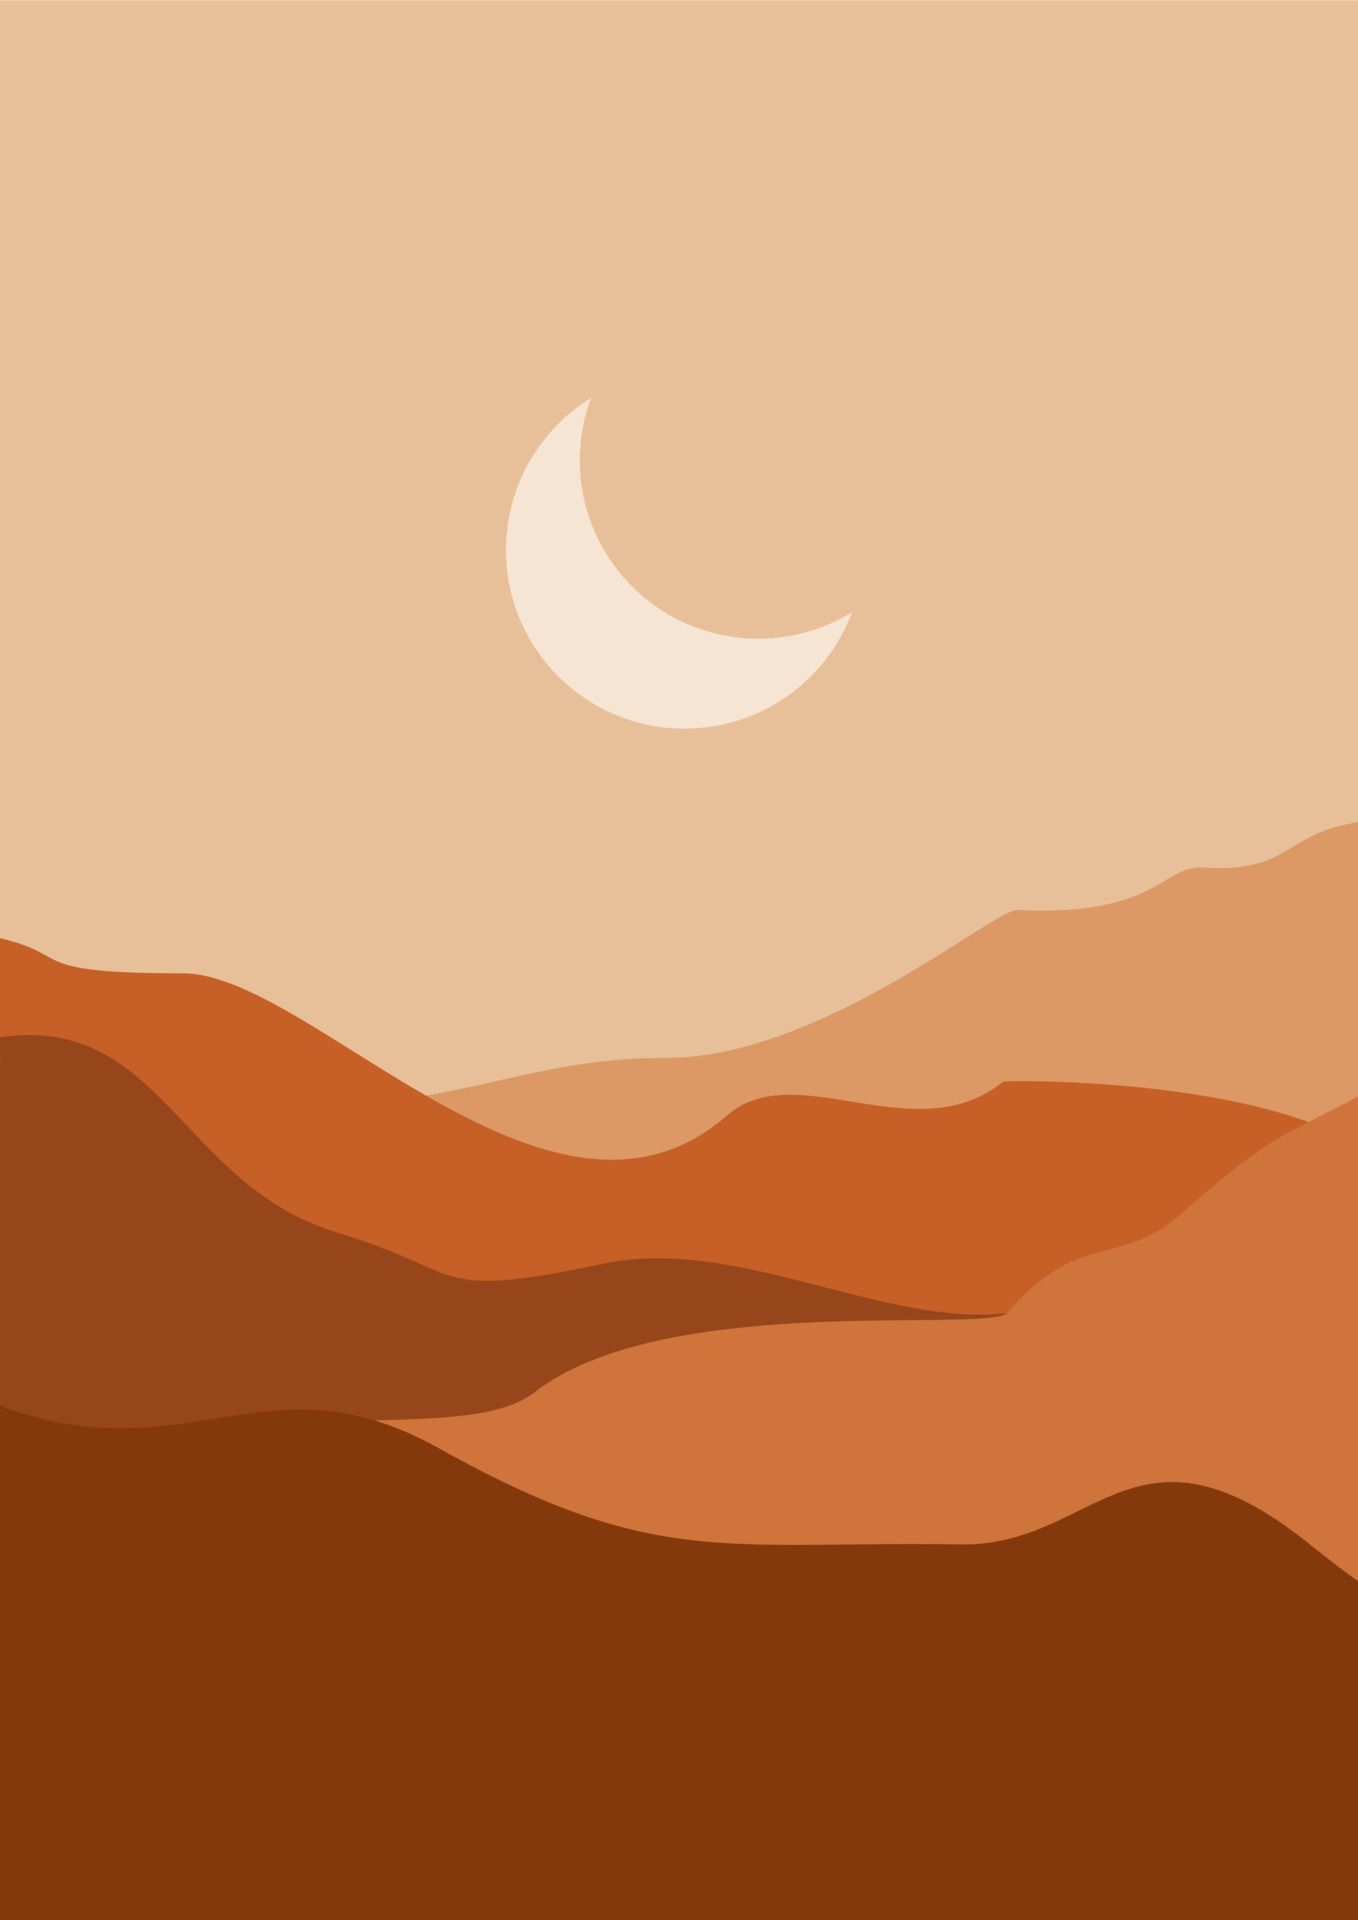 A moon and mountains in the sky - Earth, abstract, pastel orange, sun, desert, terracotta